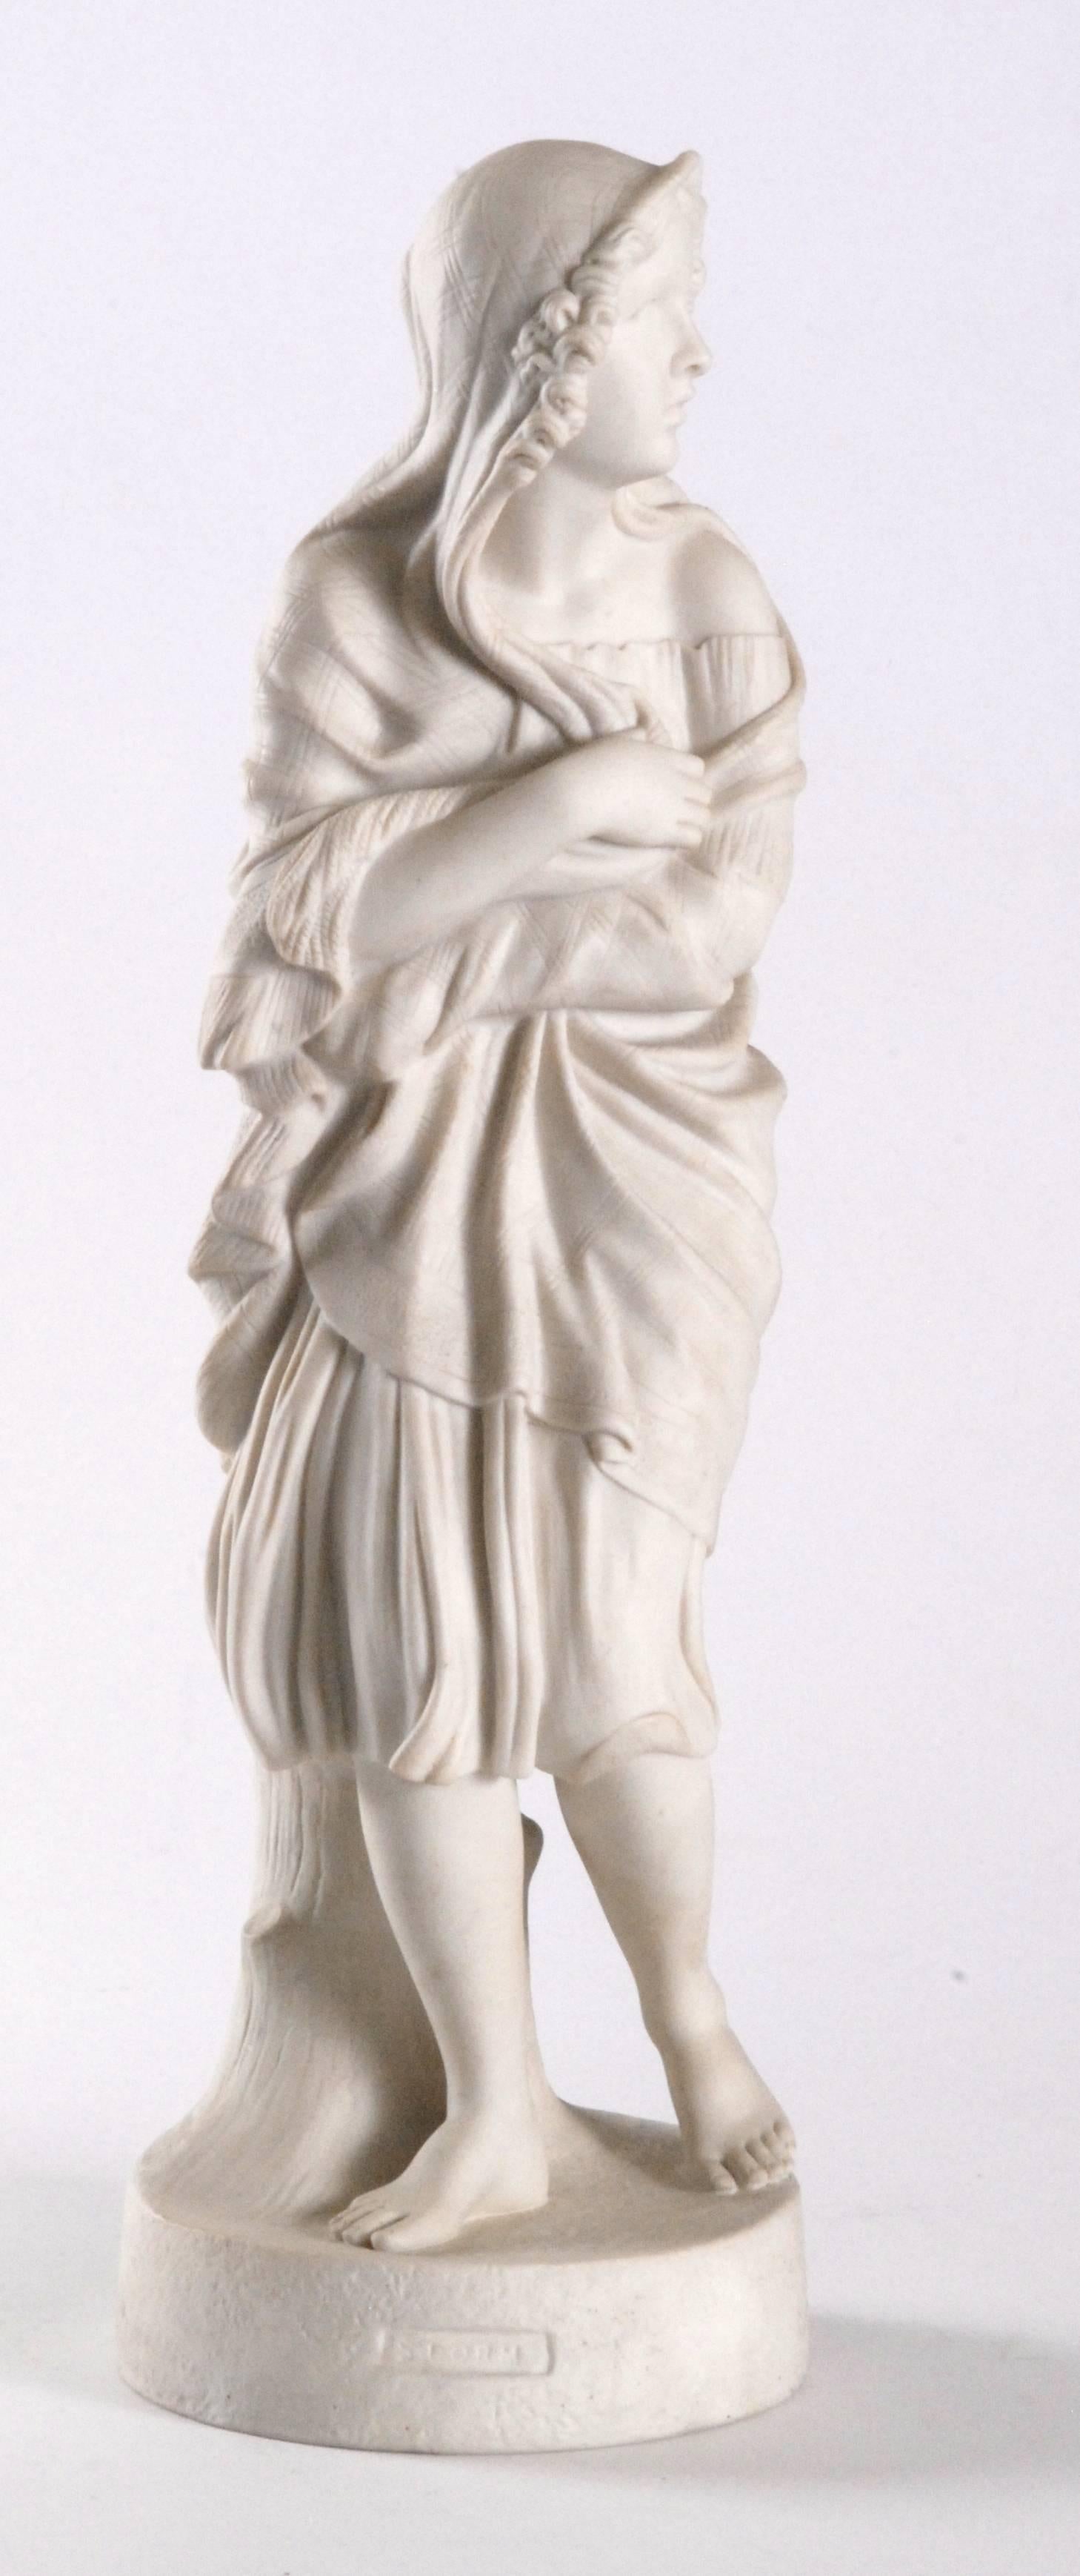 19th Century Copeland Parian Statue, 'Storm' by William Brodie, circa 1858 In Excellent Condition For Sale In Pymble, NSW